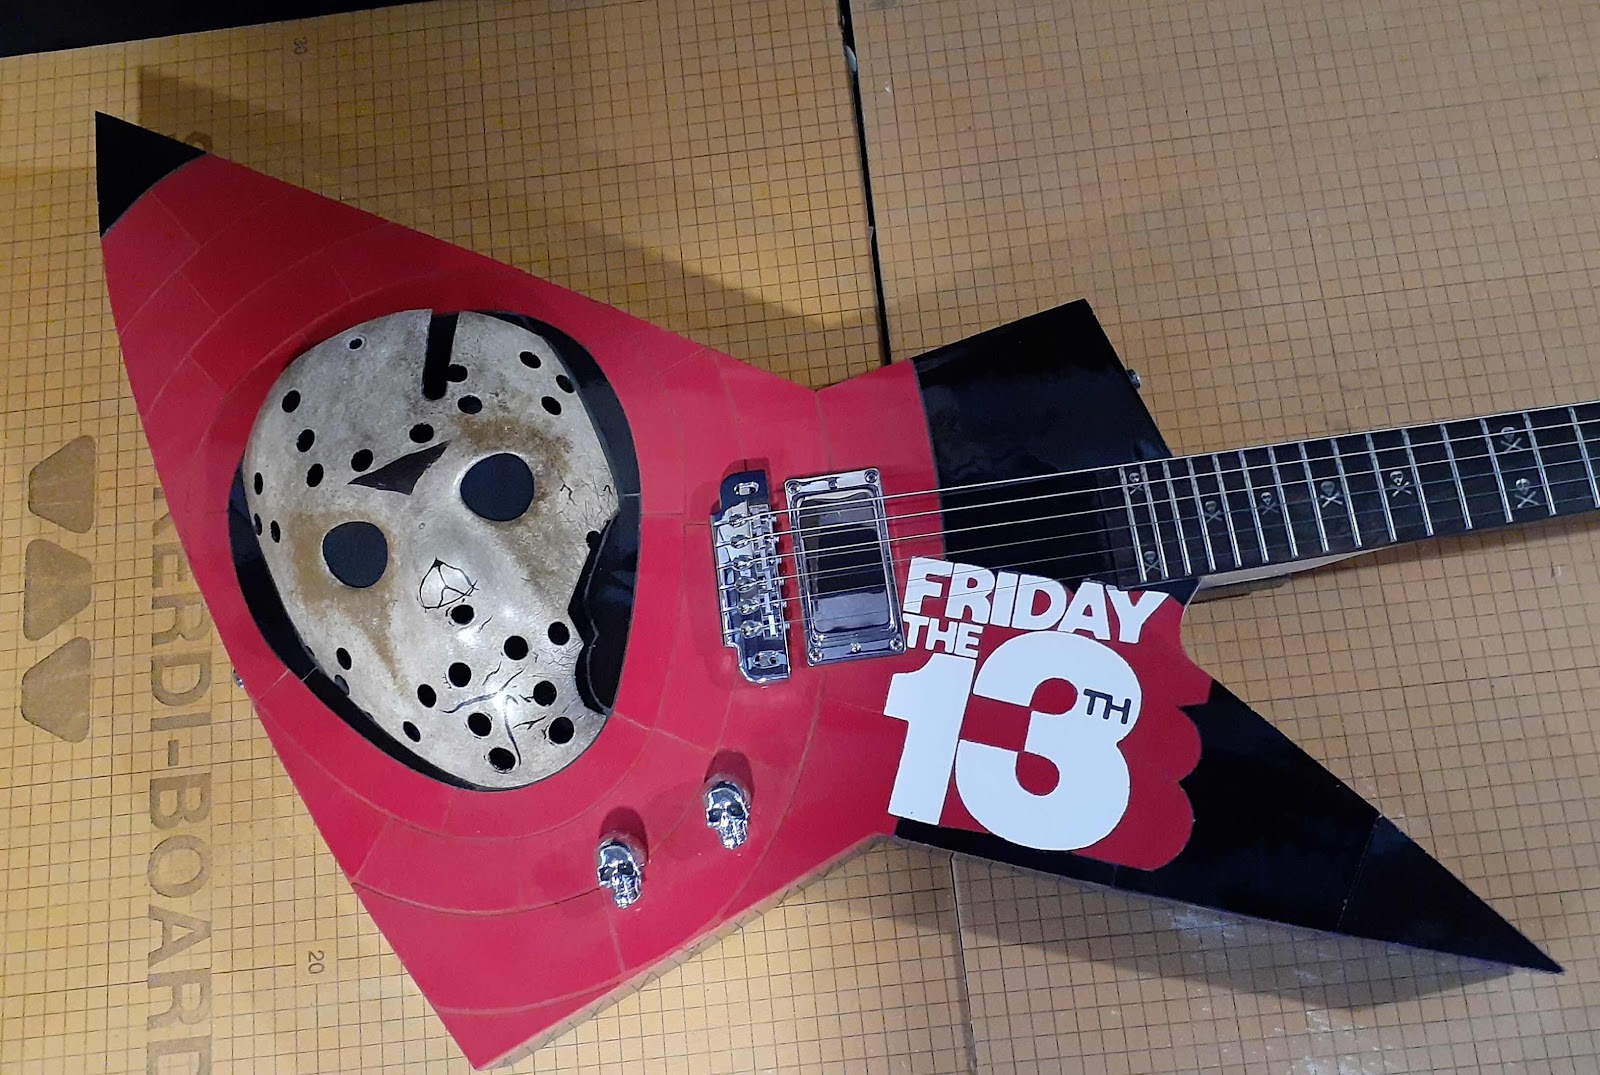 Custom Friday The 13th Guitar Represents The Franchise Proudly